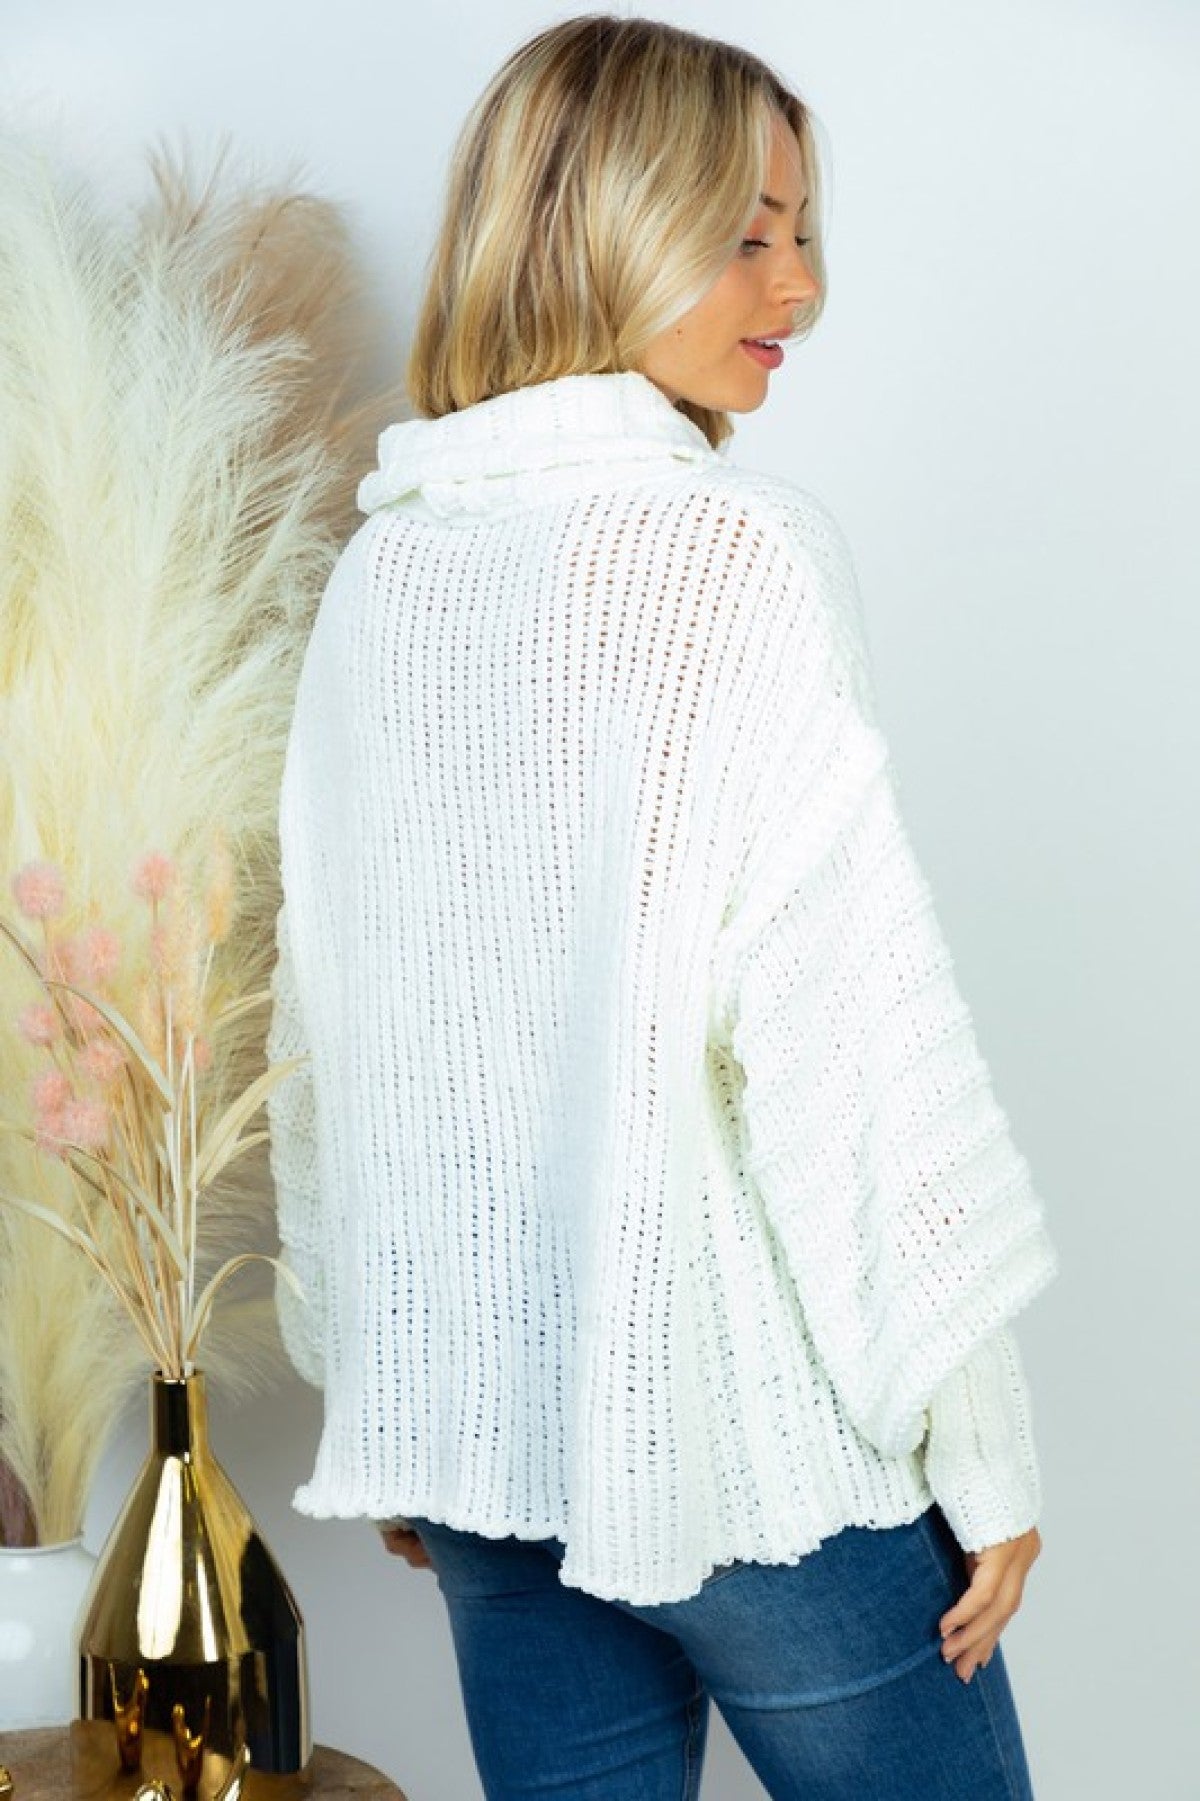 What a Wonderful Turtle Neck Sweater in Off-White